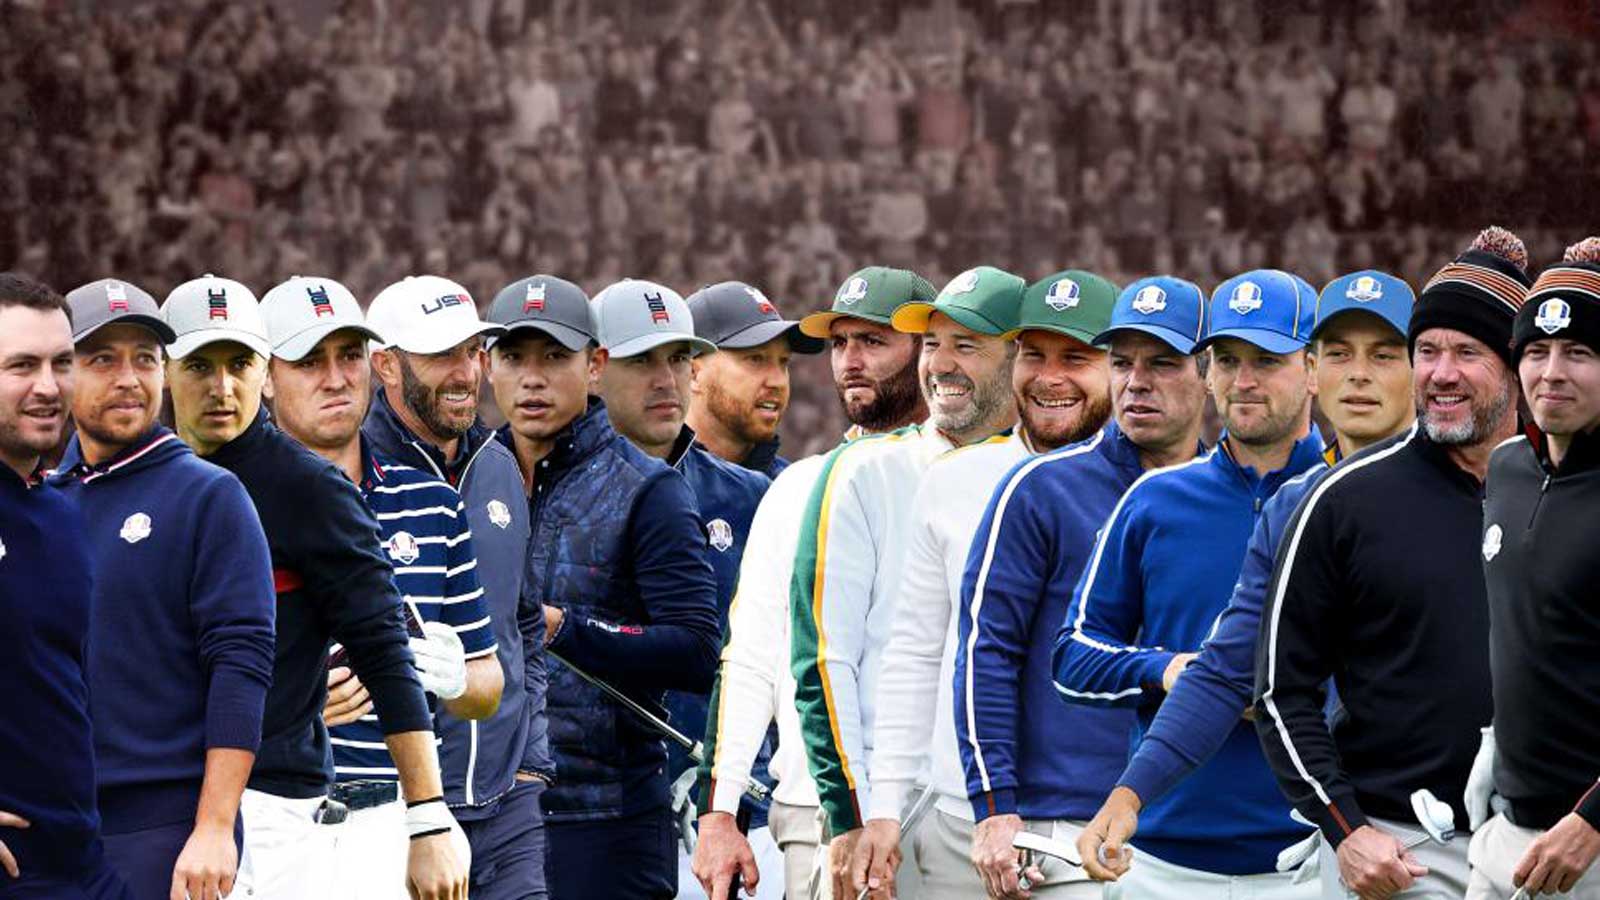 Ryder Cup 2021 Saturday pairings for the United States and Europe